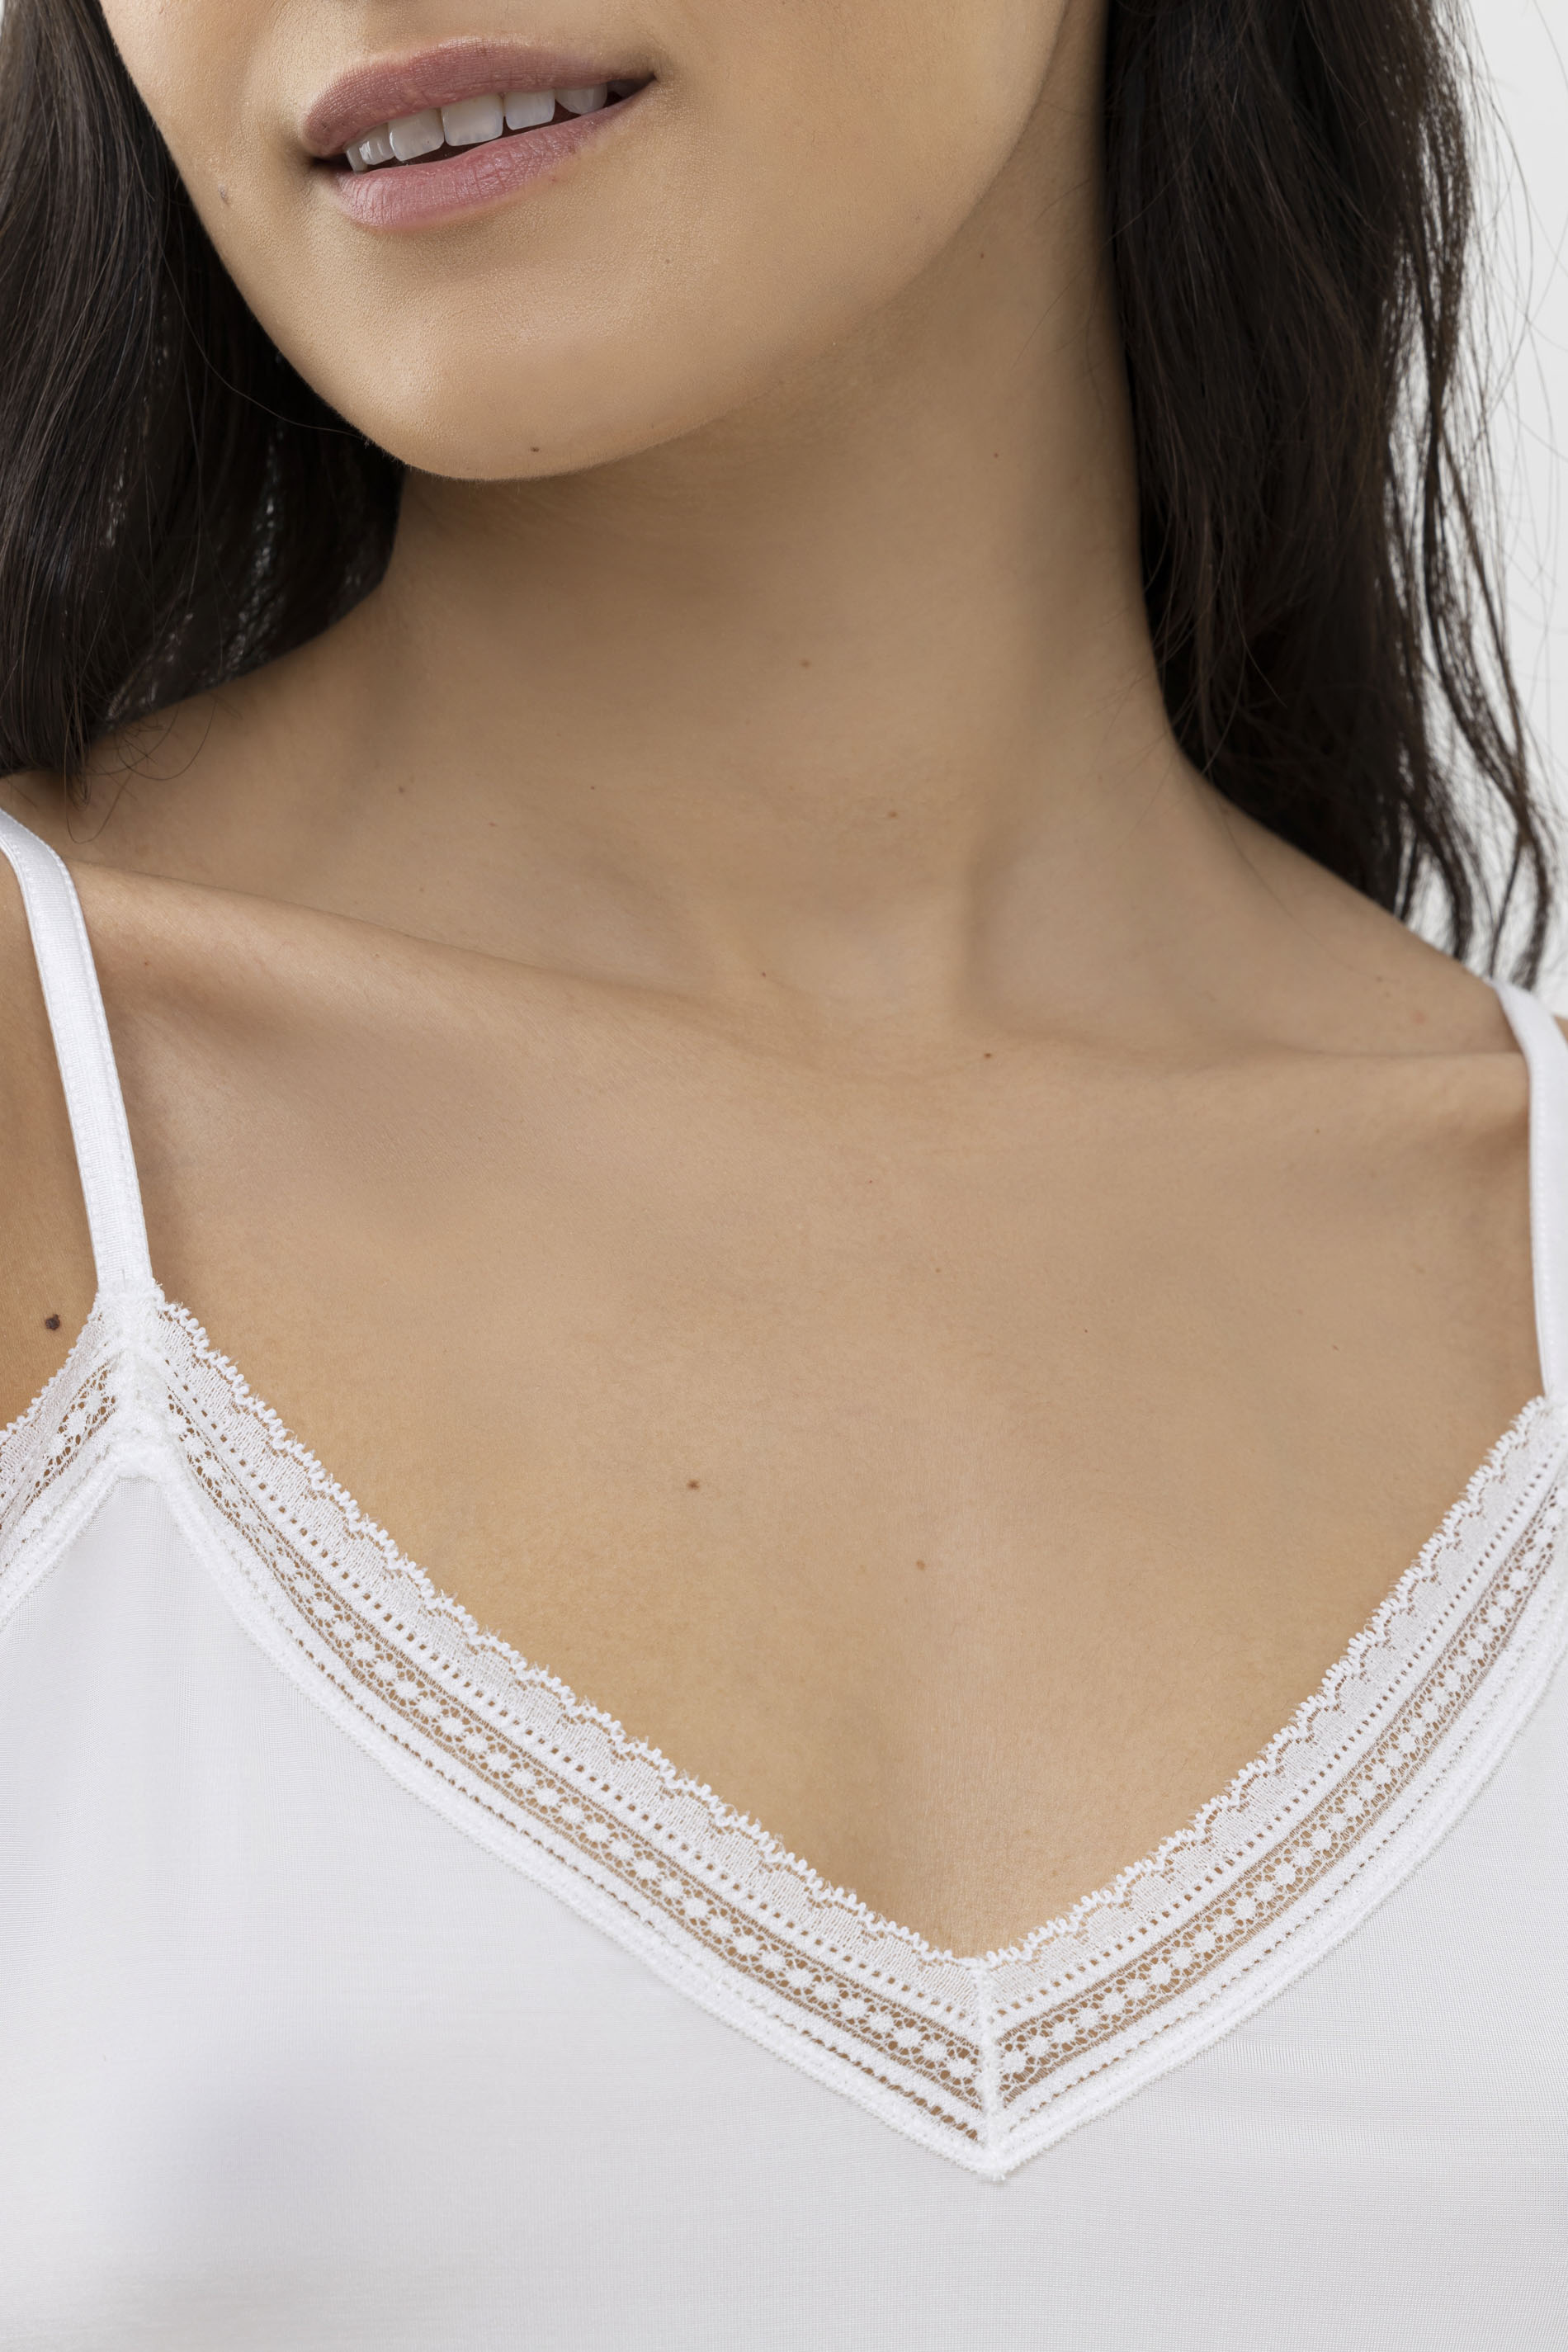 Camisole Serie Poetry Glam Detail View 01 | mey®